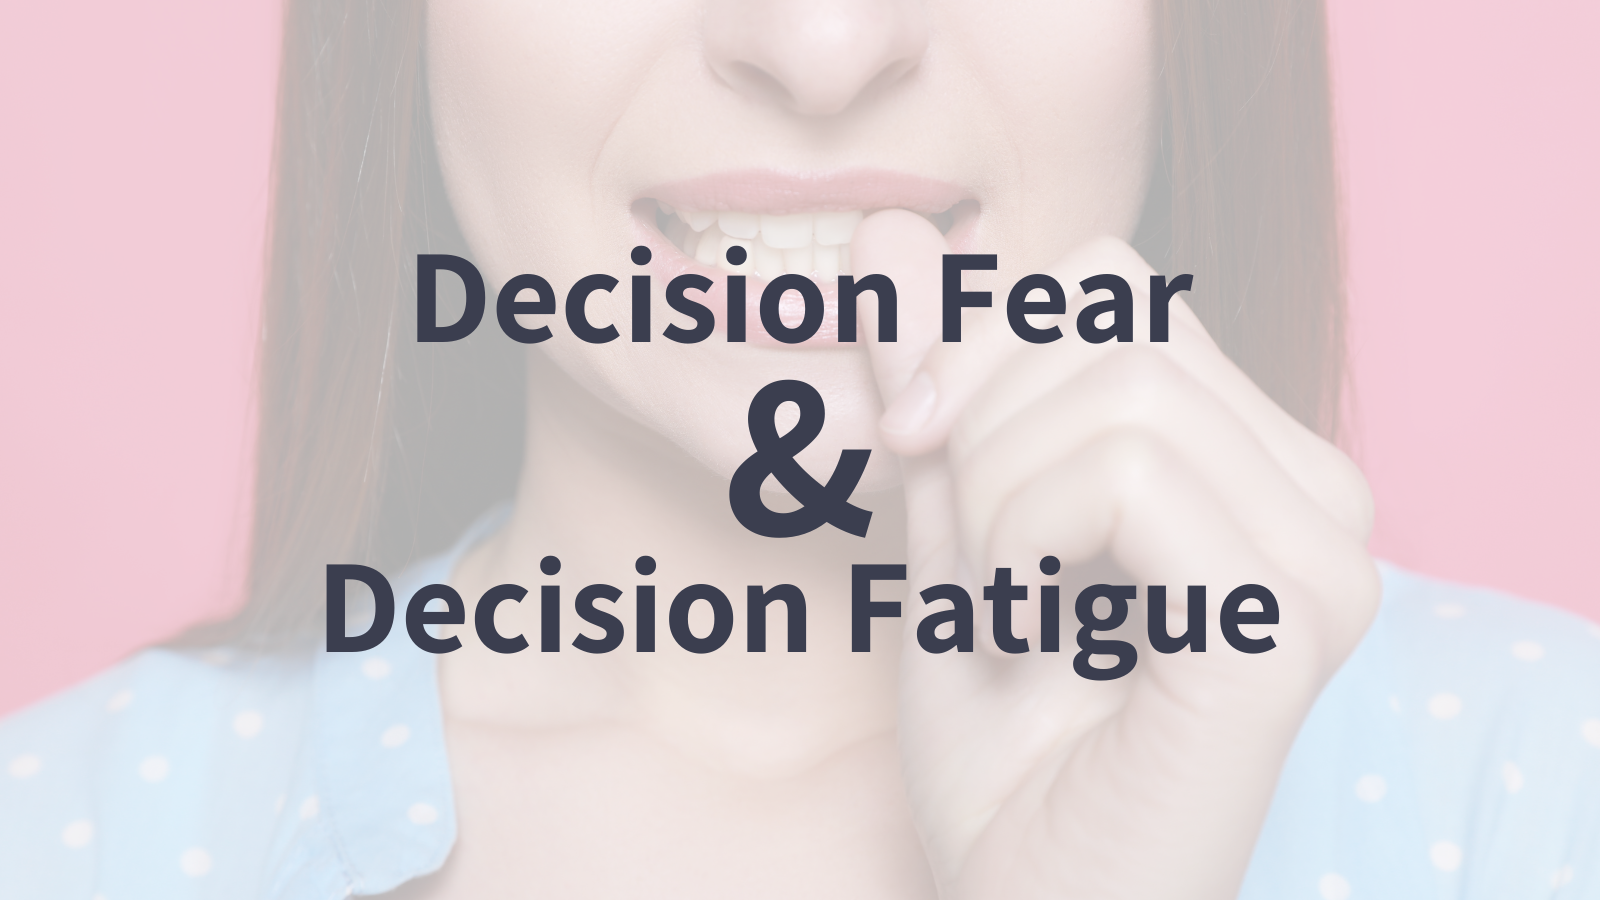 Decision Fear and Decision Fatigue